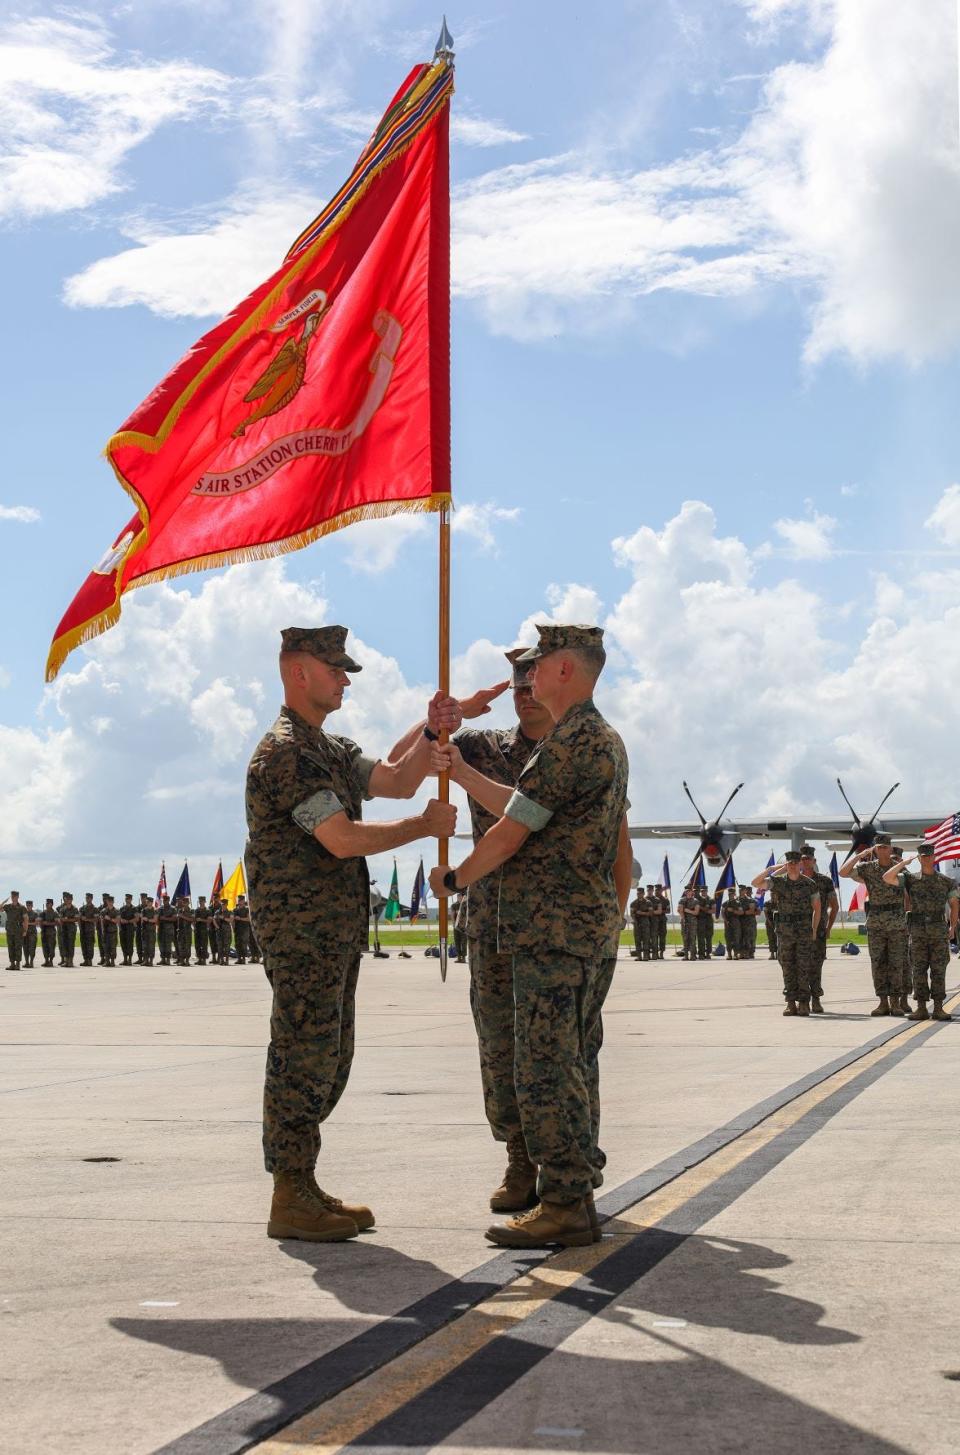 A change of command ceremony was held at Cherry Point Friday Morning where retiring Col. Mikel R. Huber relinquished command of the air station to Col. Brendan C. Burks.